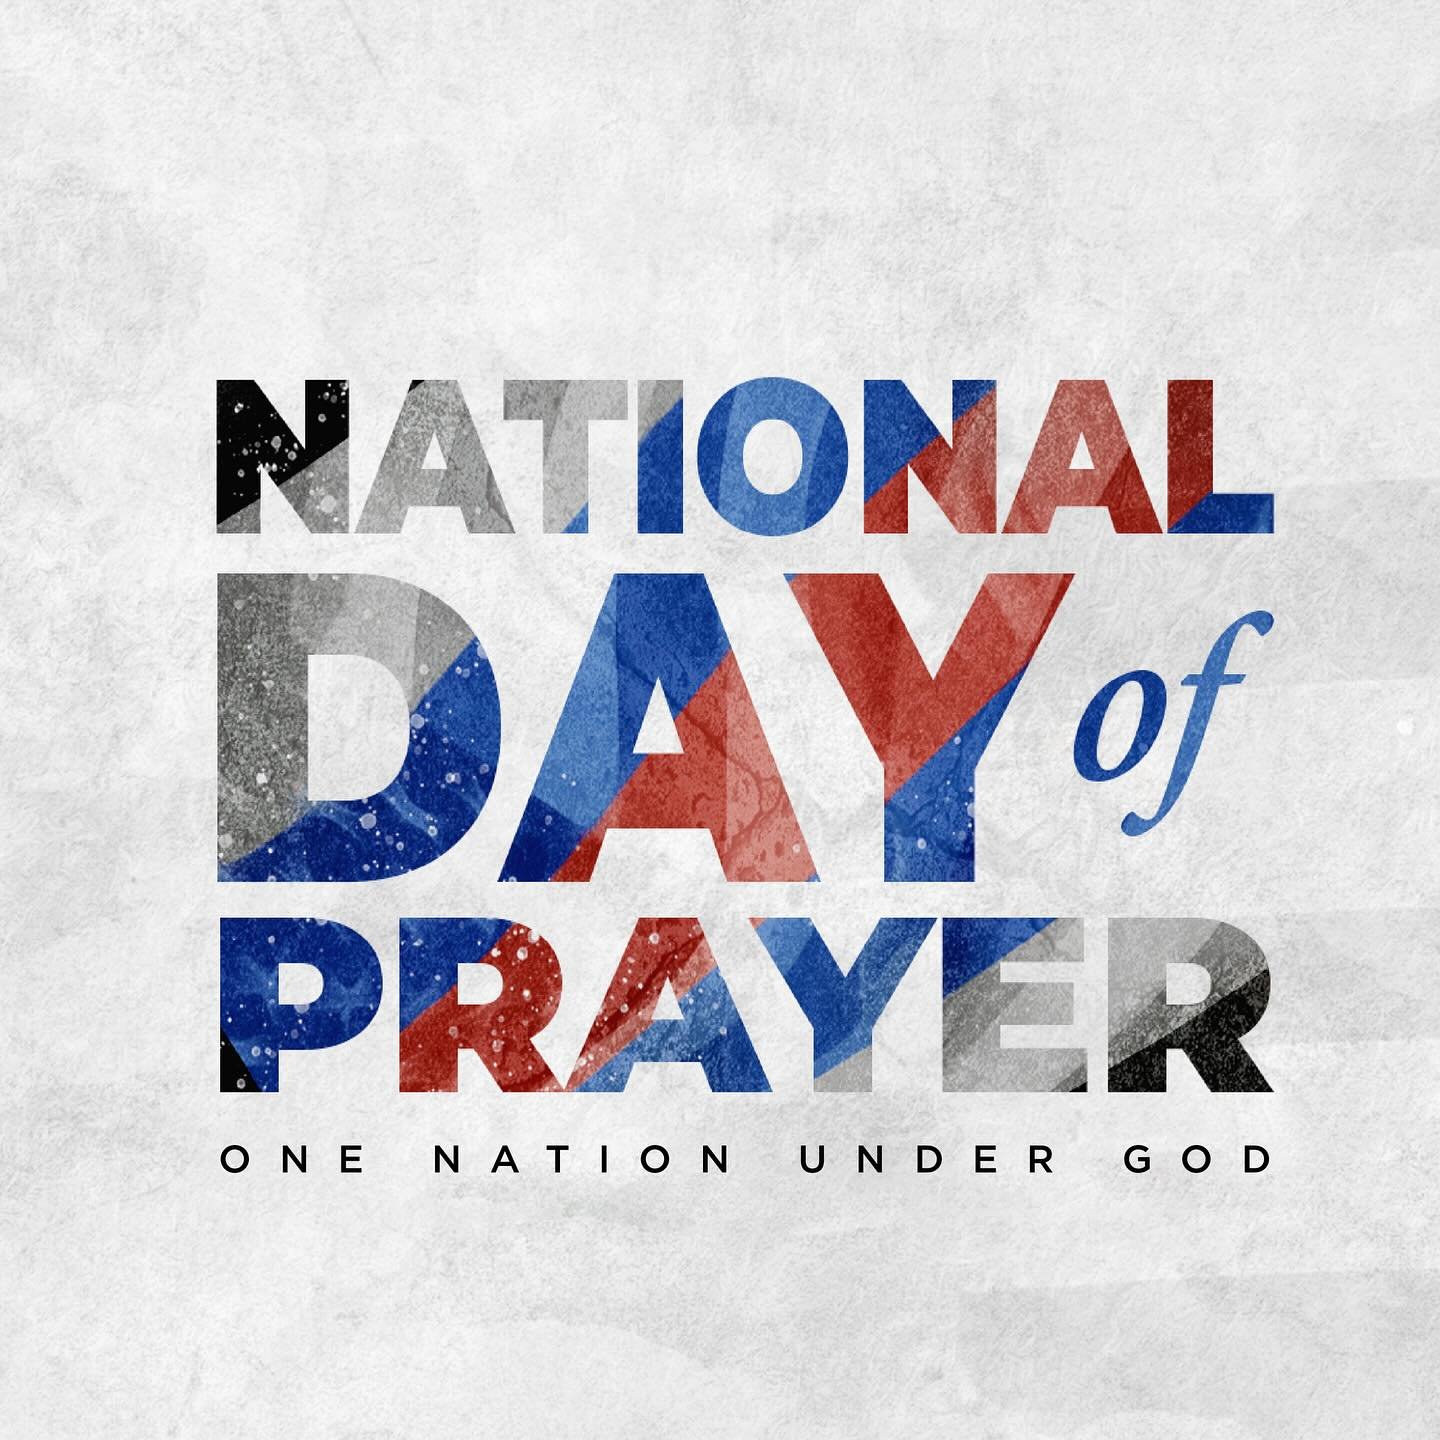 Join in with people across the nation praying today! Don&rsquo;t miss out on the chance to unify with God&rsquo;s people and petition for healing in this nation.

Pray for our nation. Pray for our leaders. Pray for our military, our churches and our 